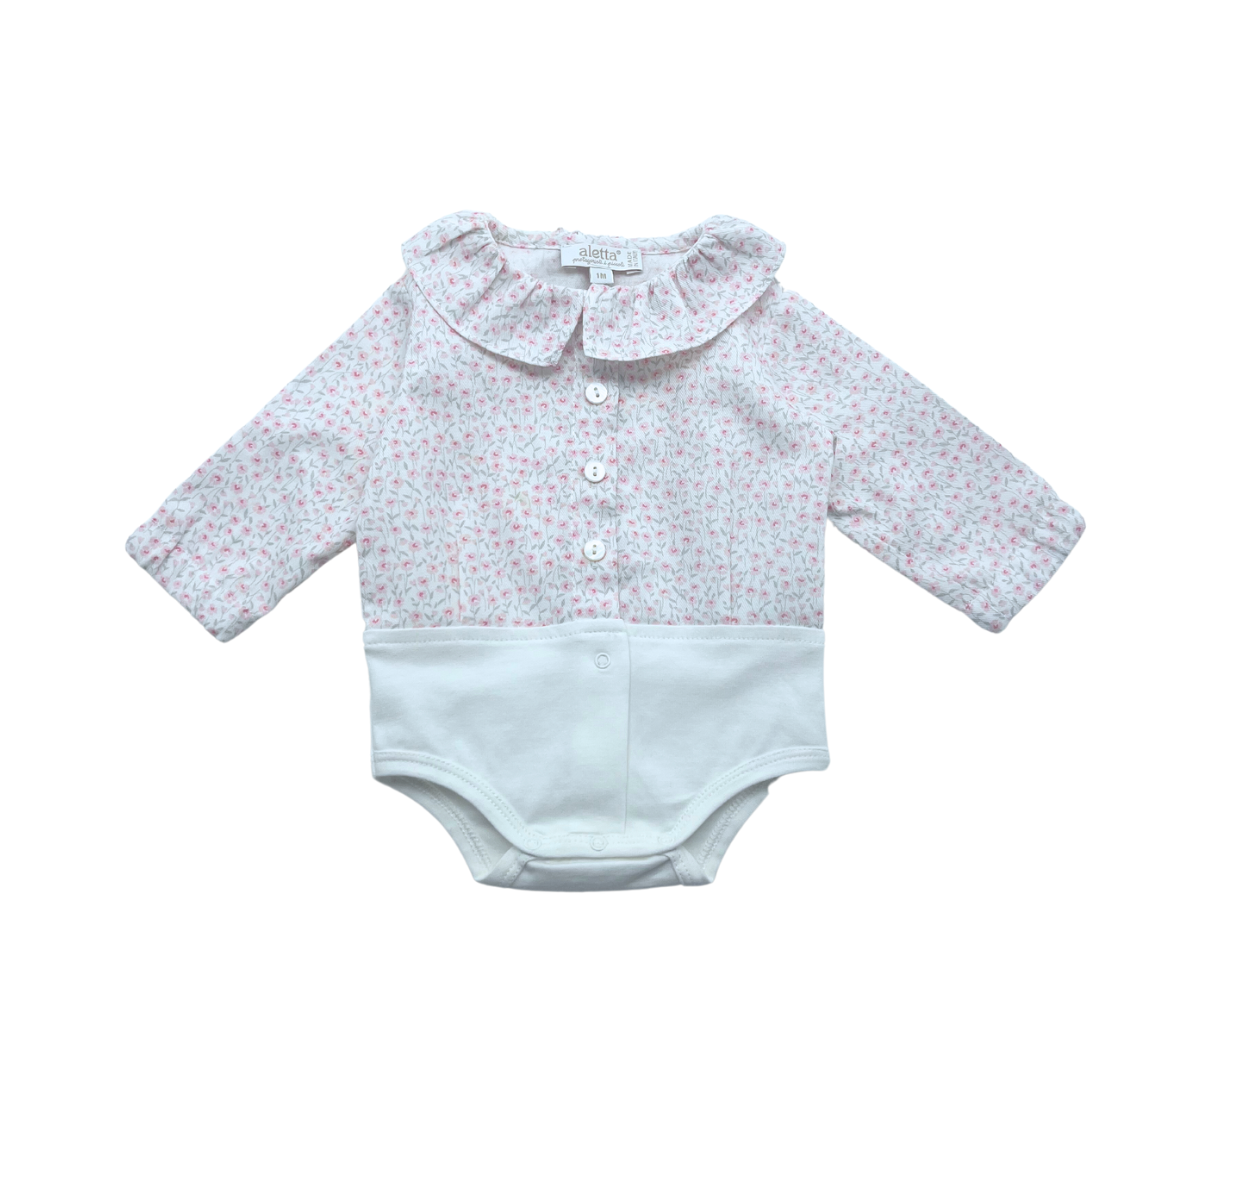 ALETTA - Bodysuit with light pink flowers - 1 month old